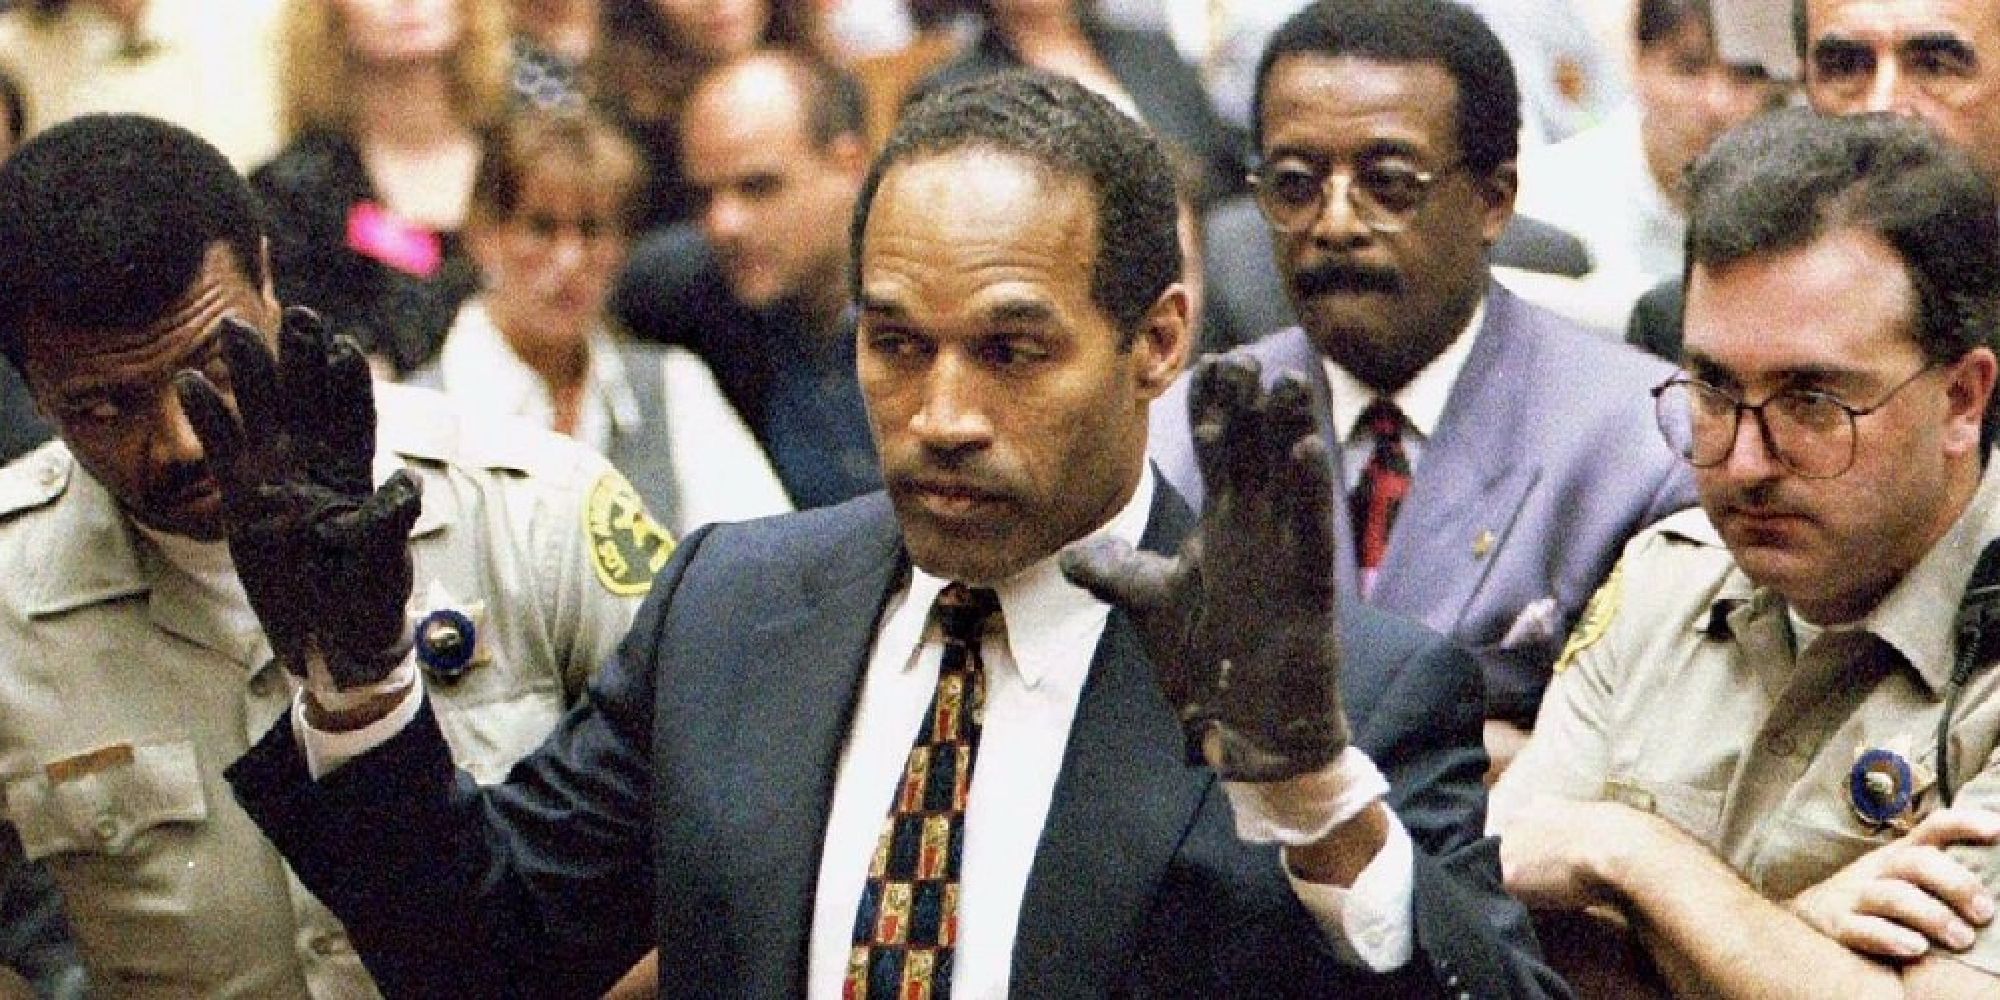 O.J. Made in America - Documentaire 2016